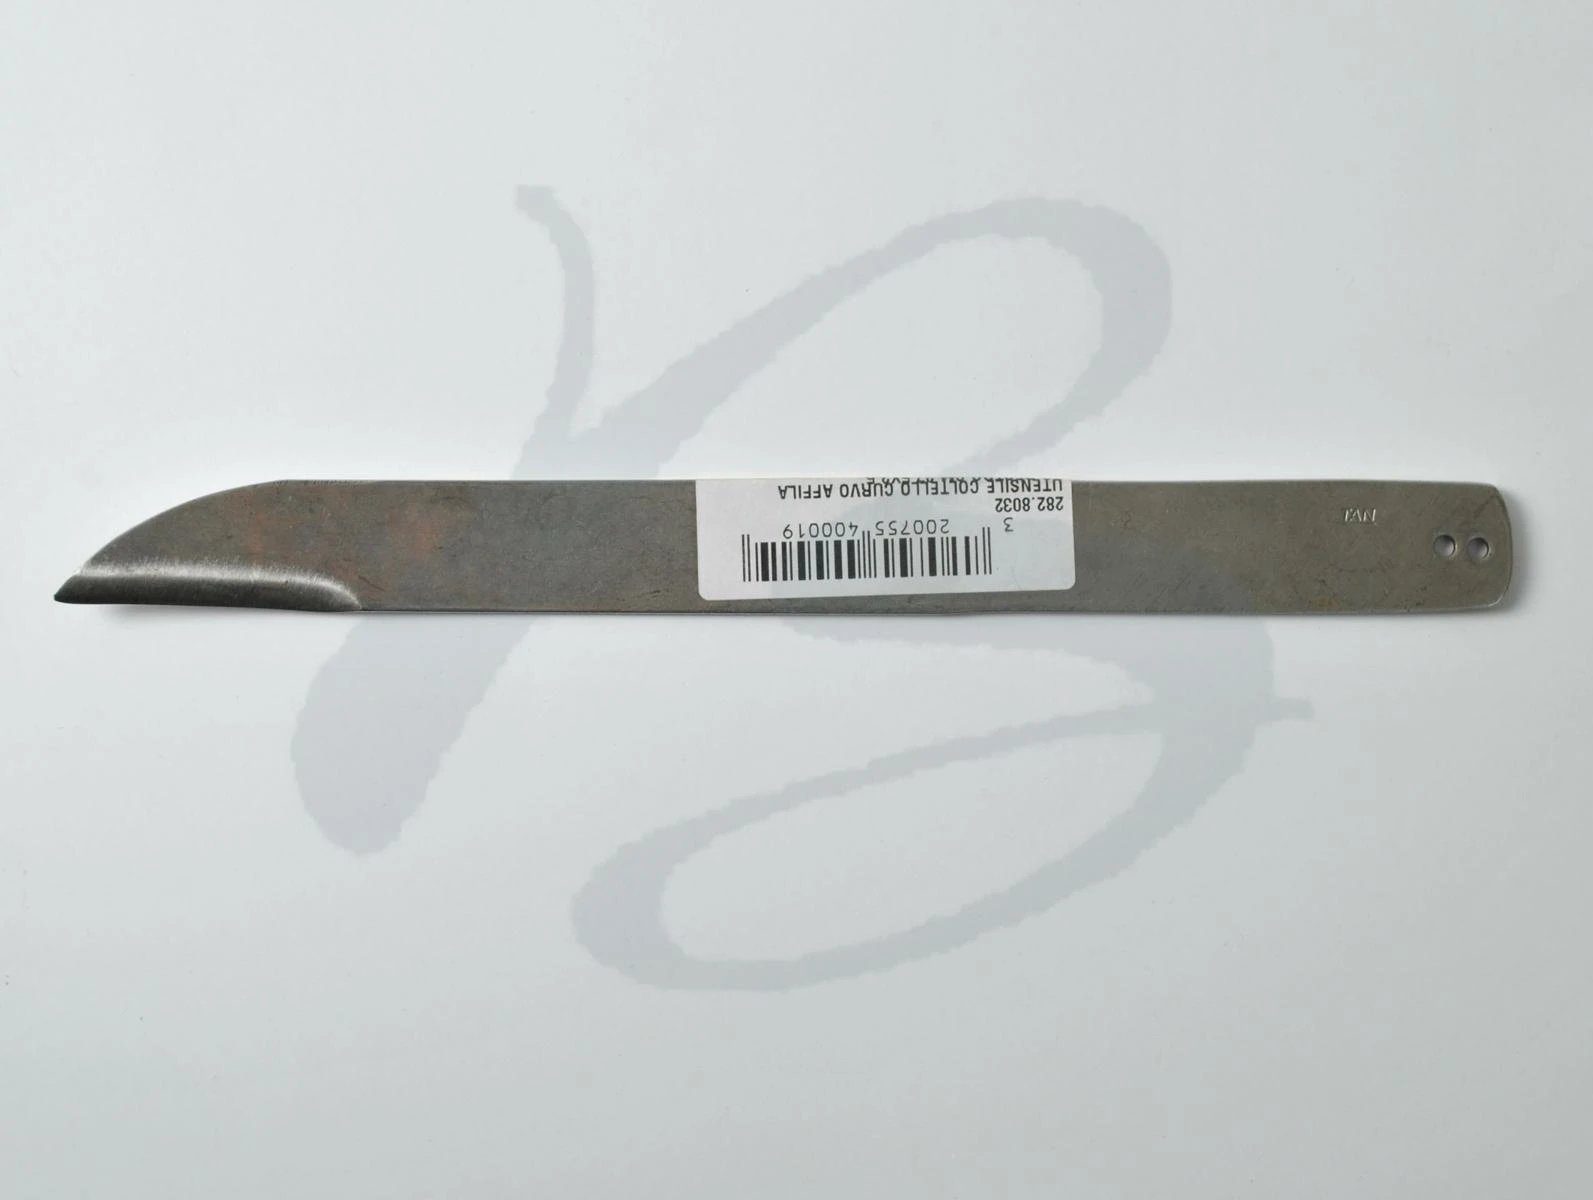 SHOEMAKER'S KNIFE CURVED - RIGHT 